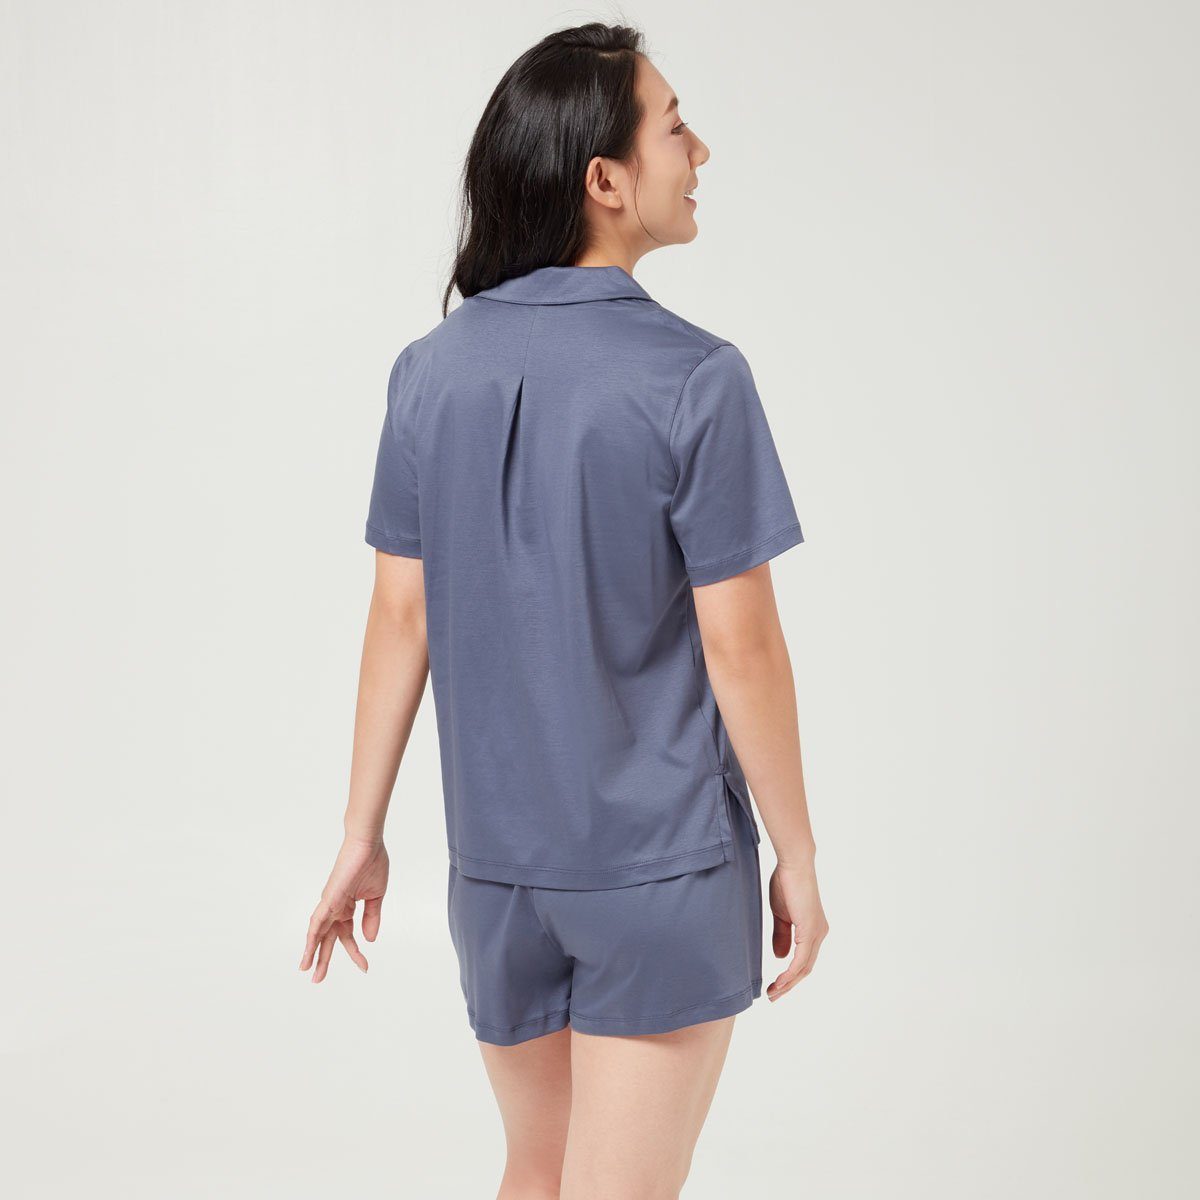 Cotton Silk Pajamas set- Short Sleeve Tops and Shorts Homewear Her Own Words 